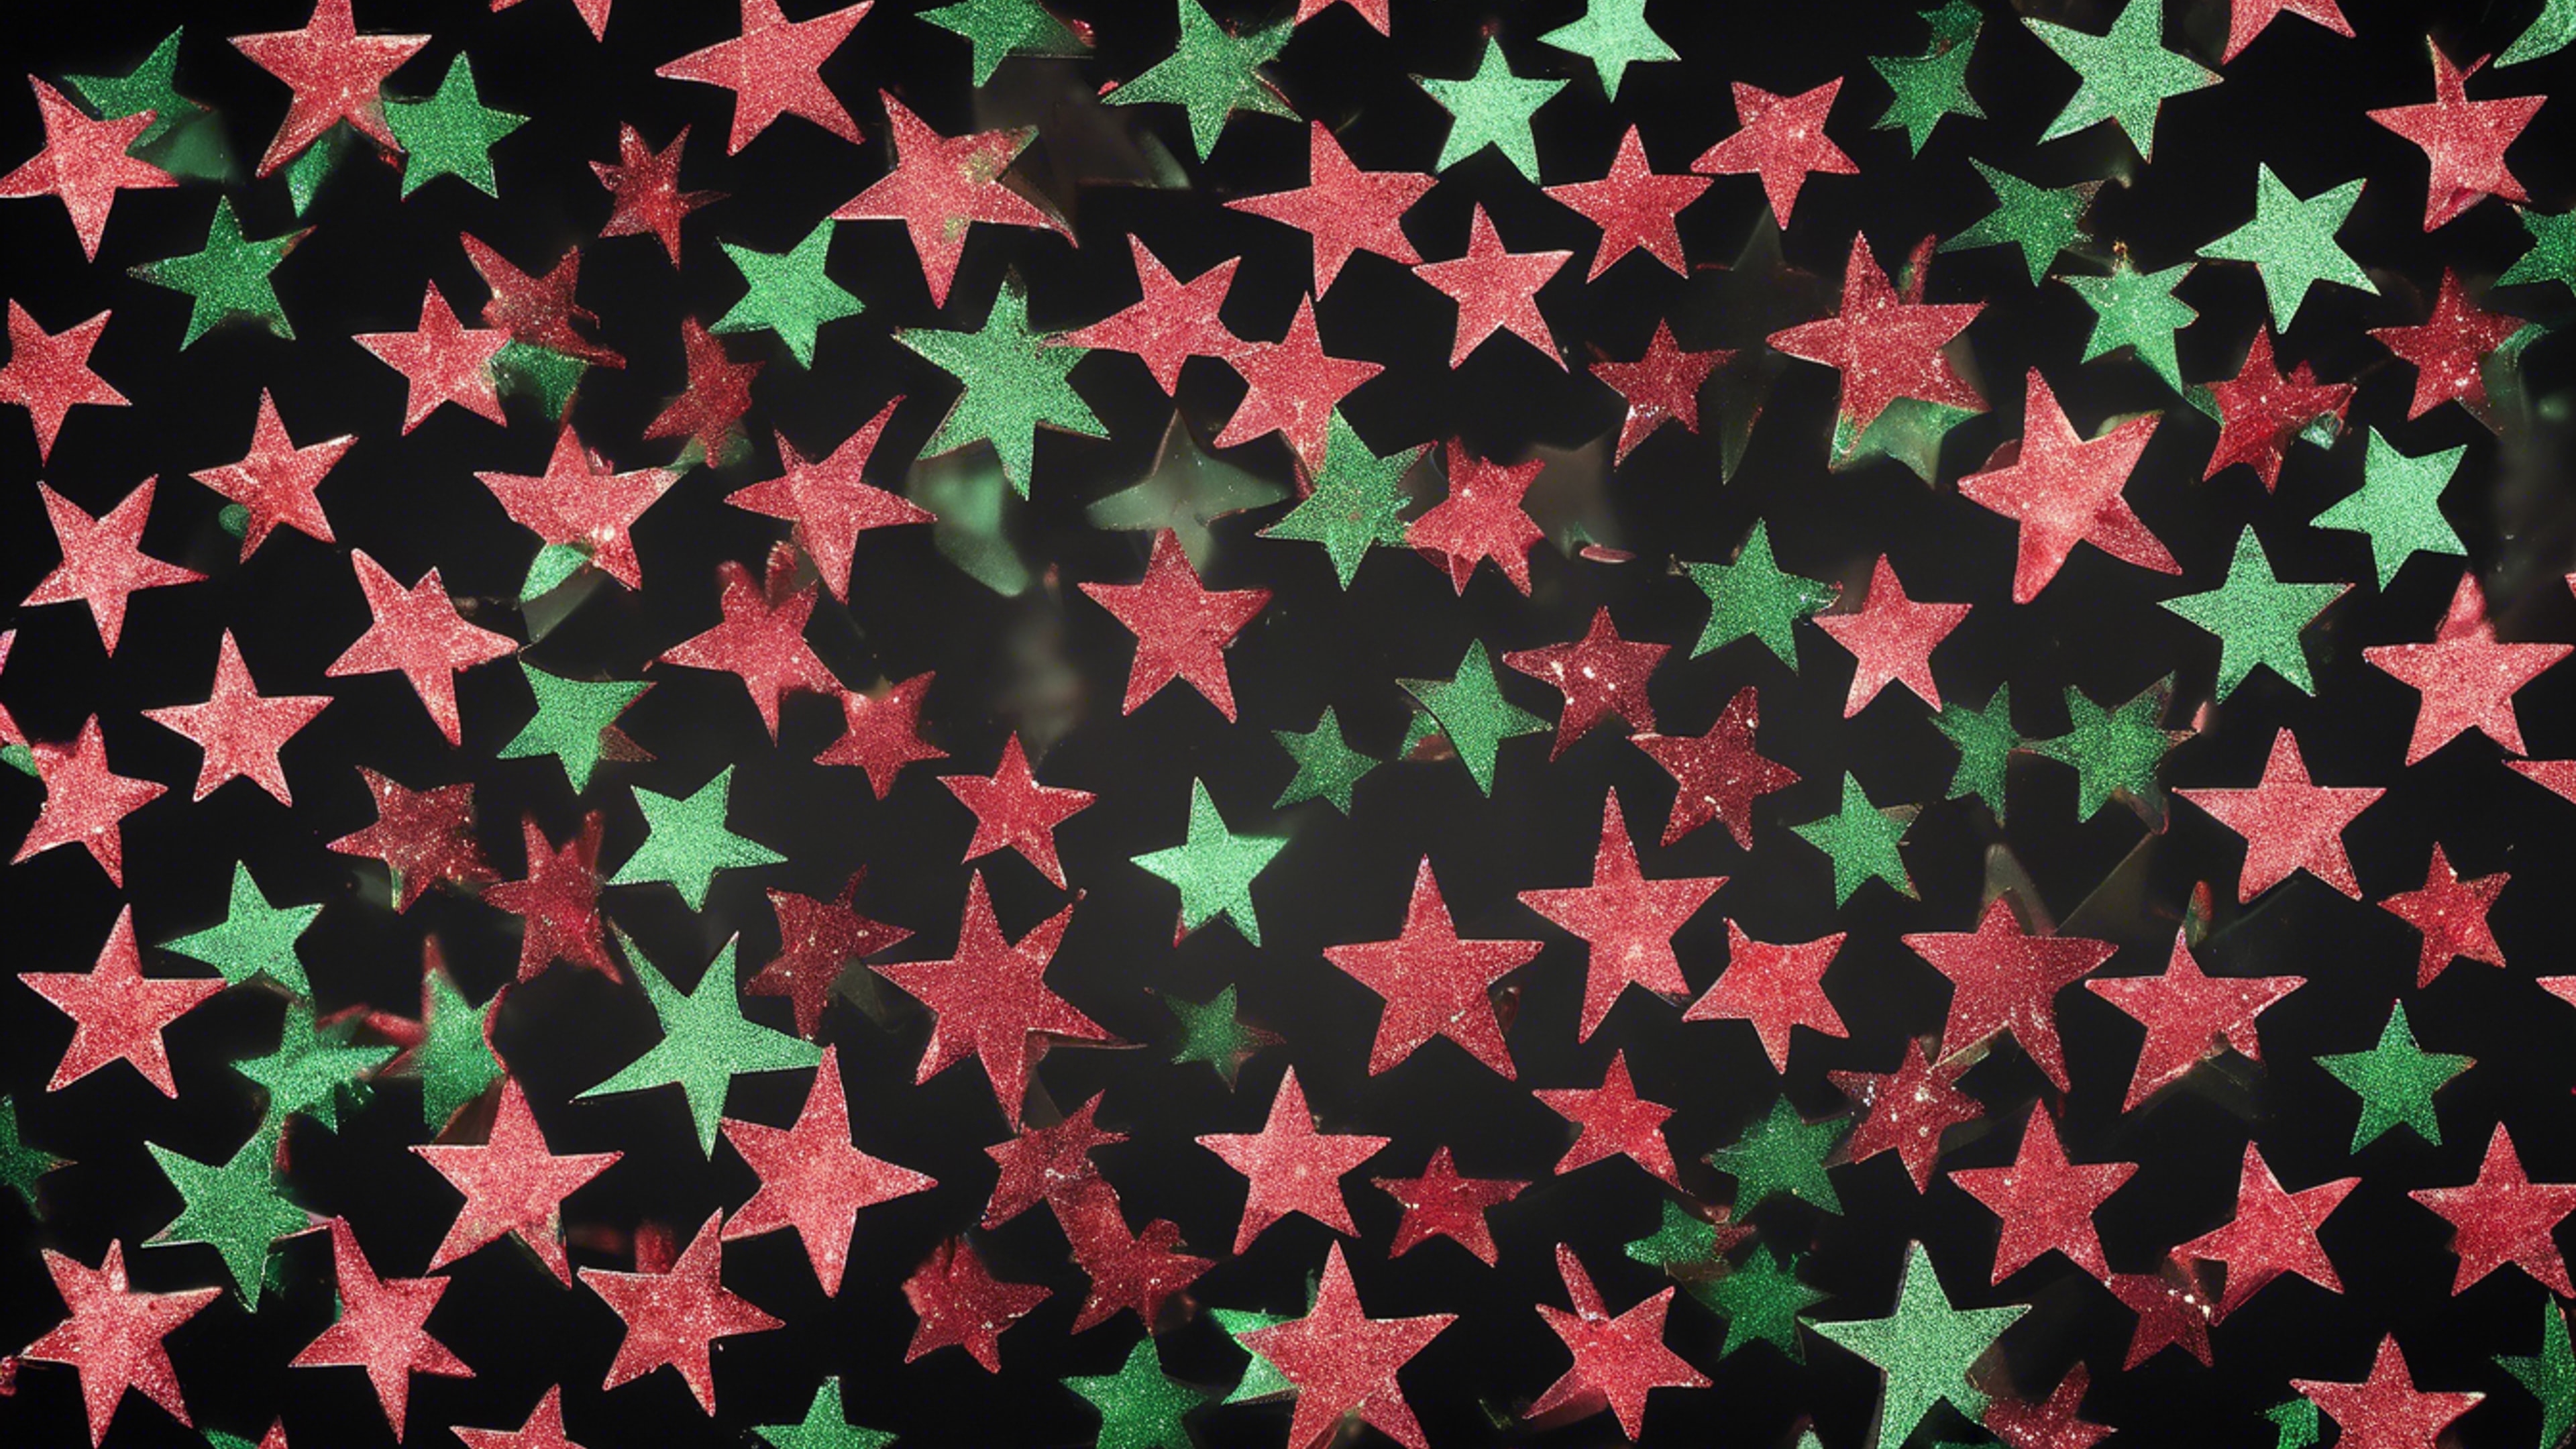 Green and red glitter forming star shapes on a black background Kertas dinding[2fe752b5dc5f4f35ba35]